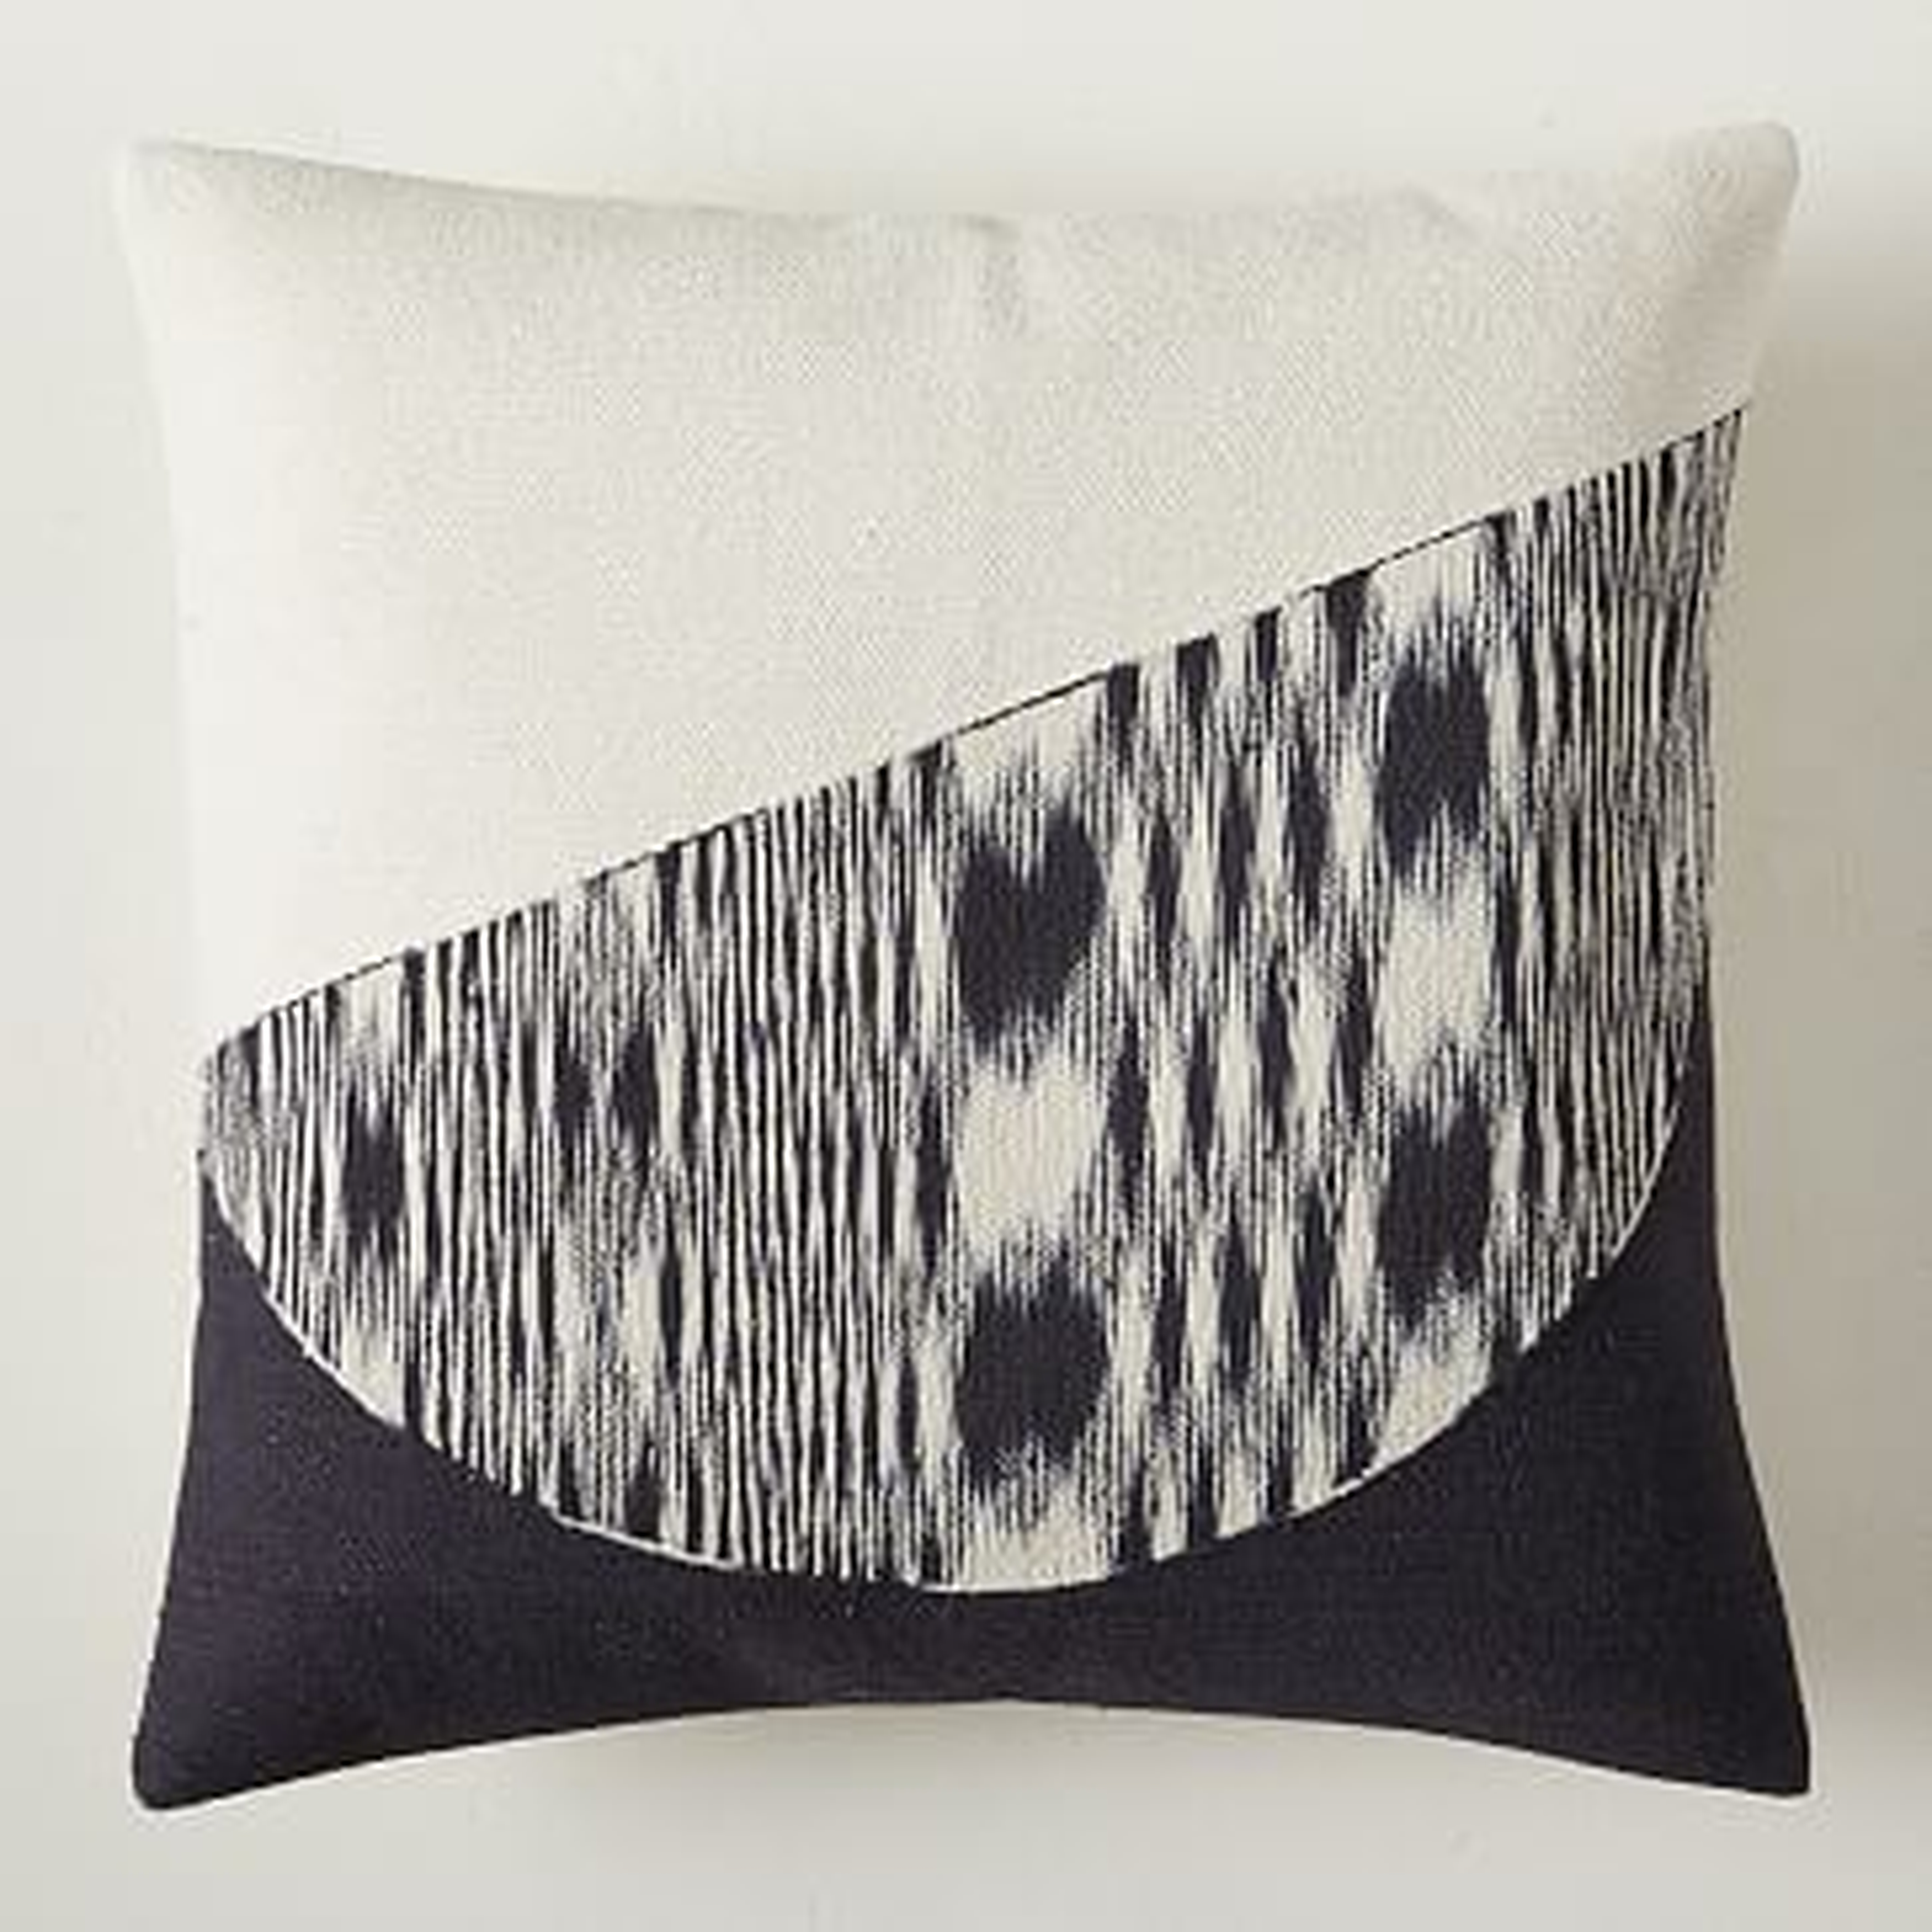 Shadow Graphic Pillow Cover, 20"x20", Black - West Elm